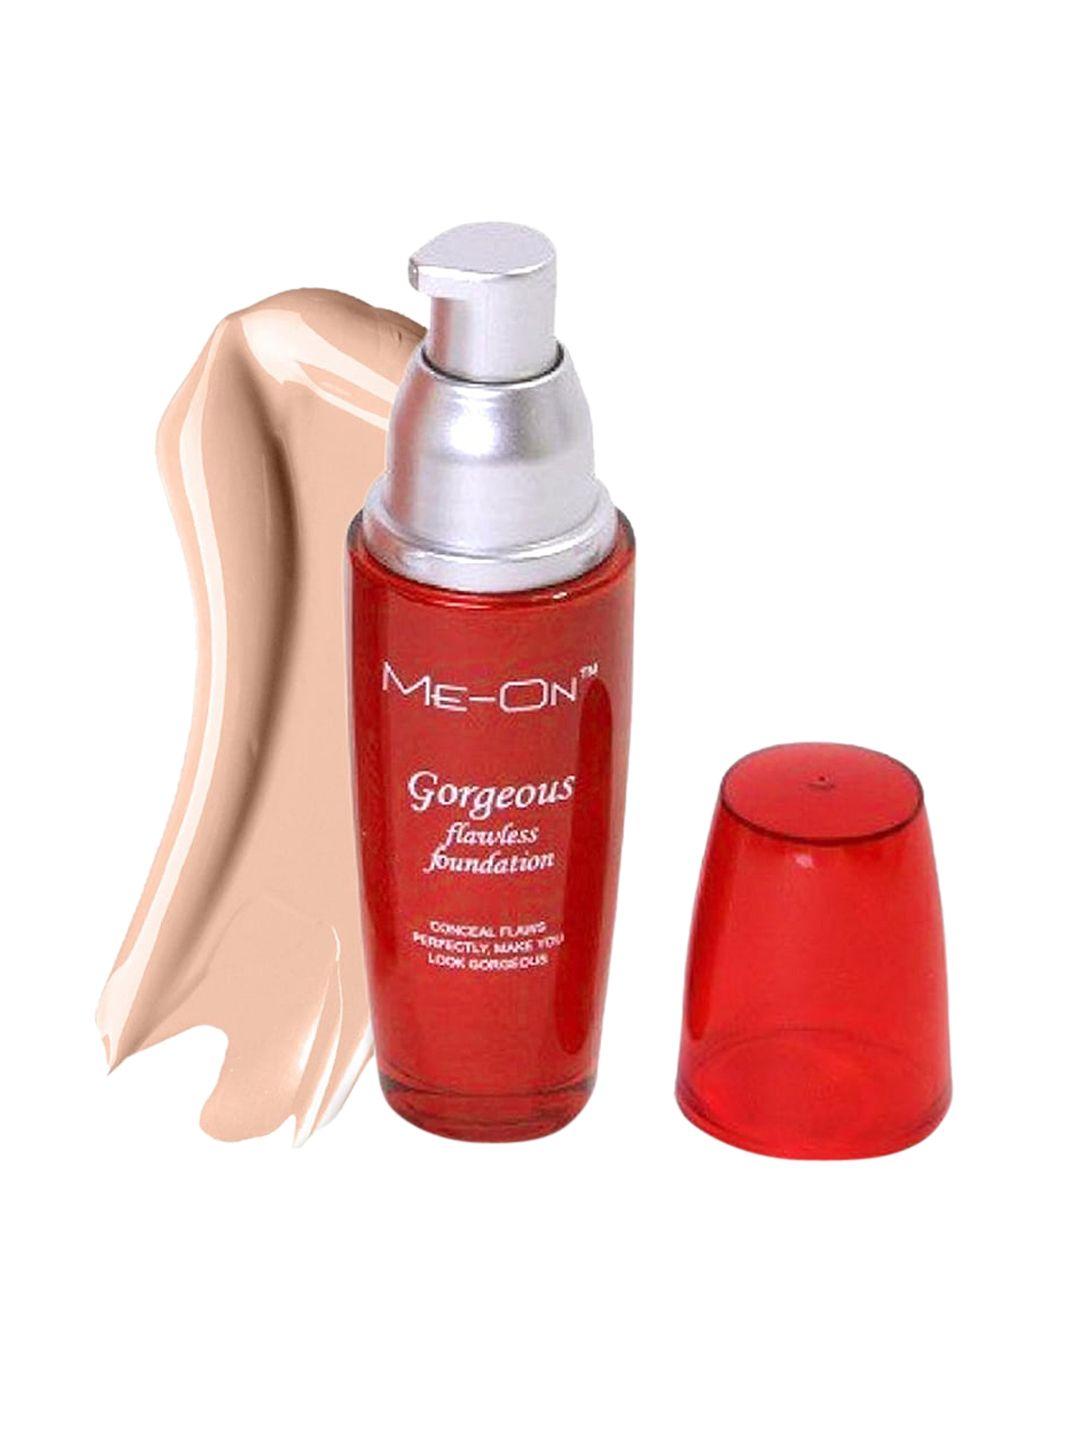 me-on gorgeous flawless foundation - skin beige 23